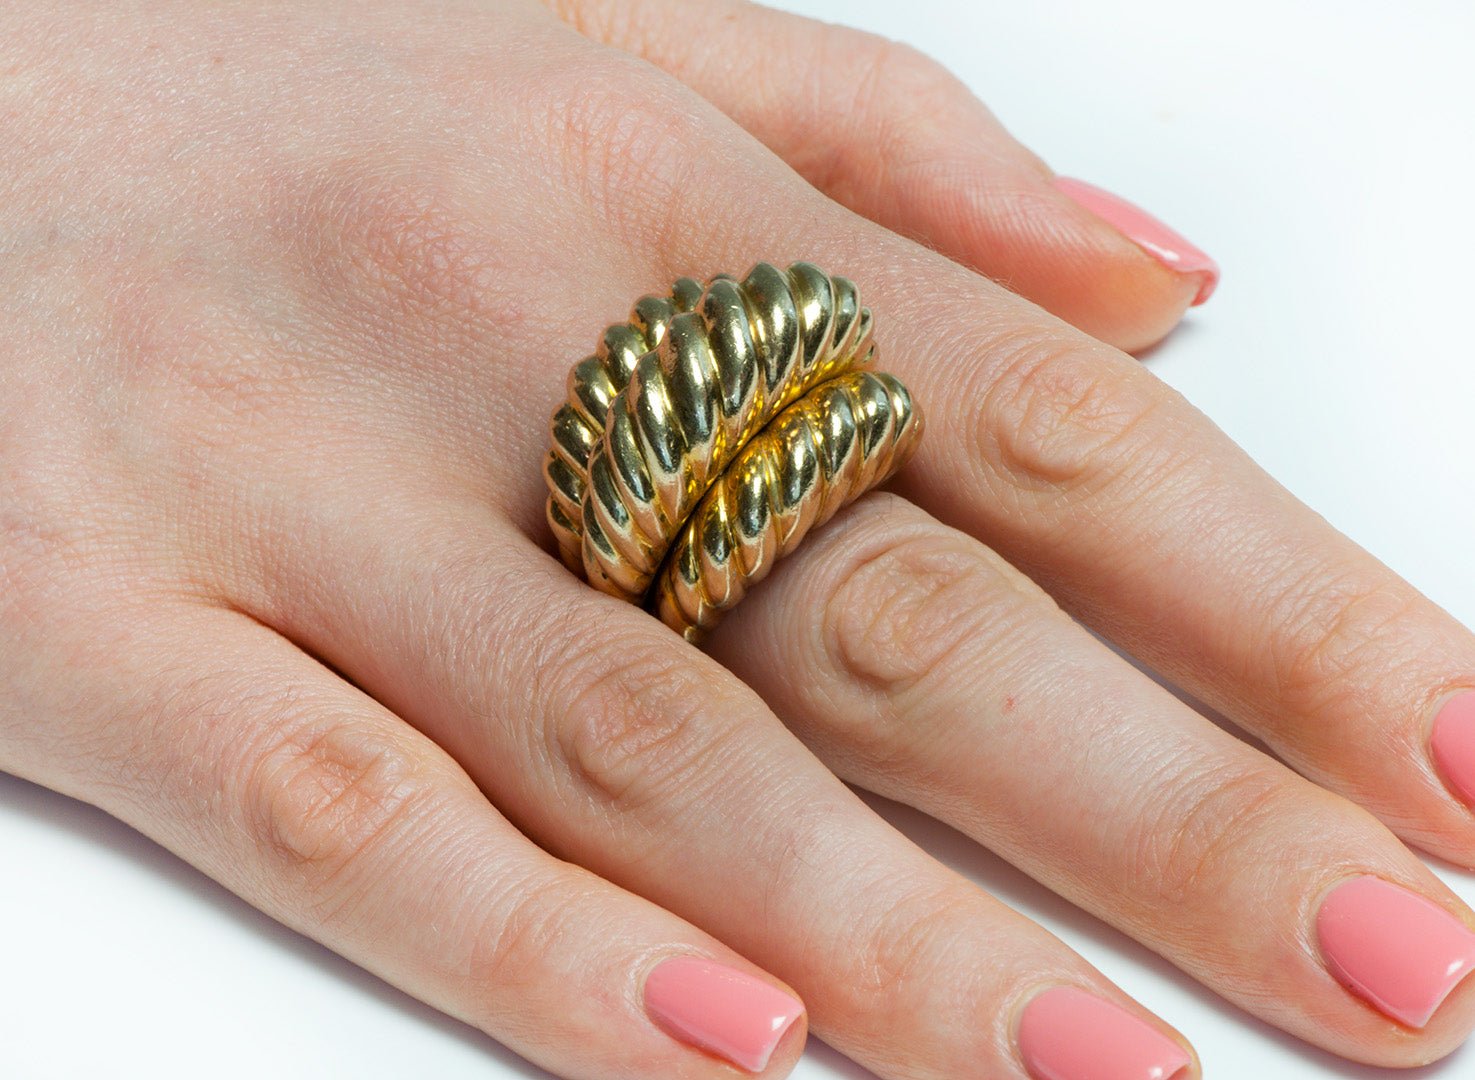 Vintage Yellow Gold Dome Ring